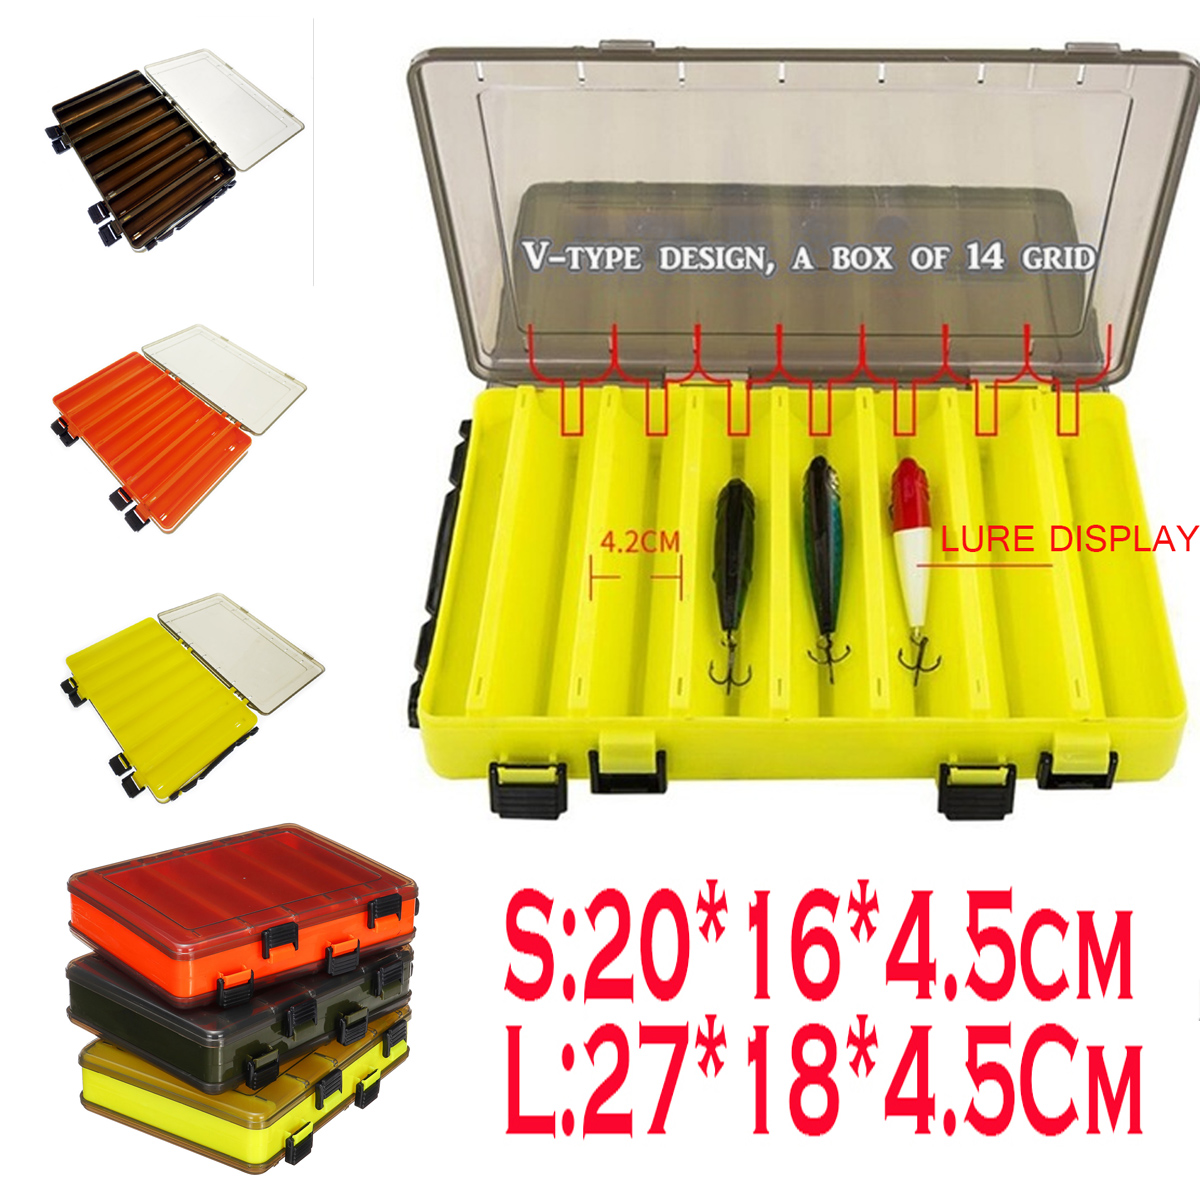 ZANLURE-Fishing-Box-Double-Sided-Fishing-Lure-Pesca-Accessories-Bait-Lure-Case-Box-Container-1552970-9